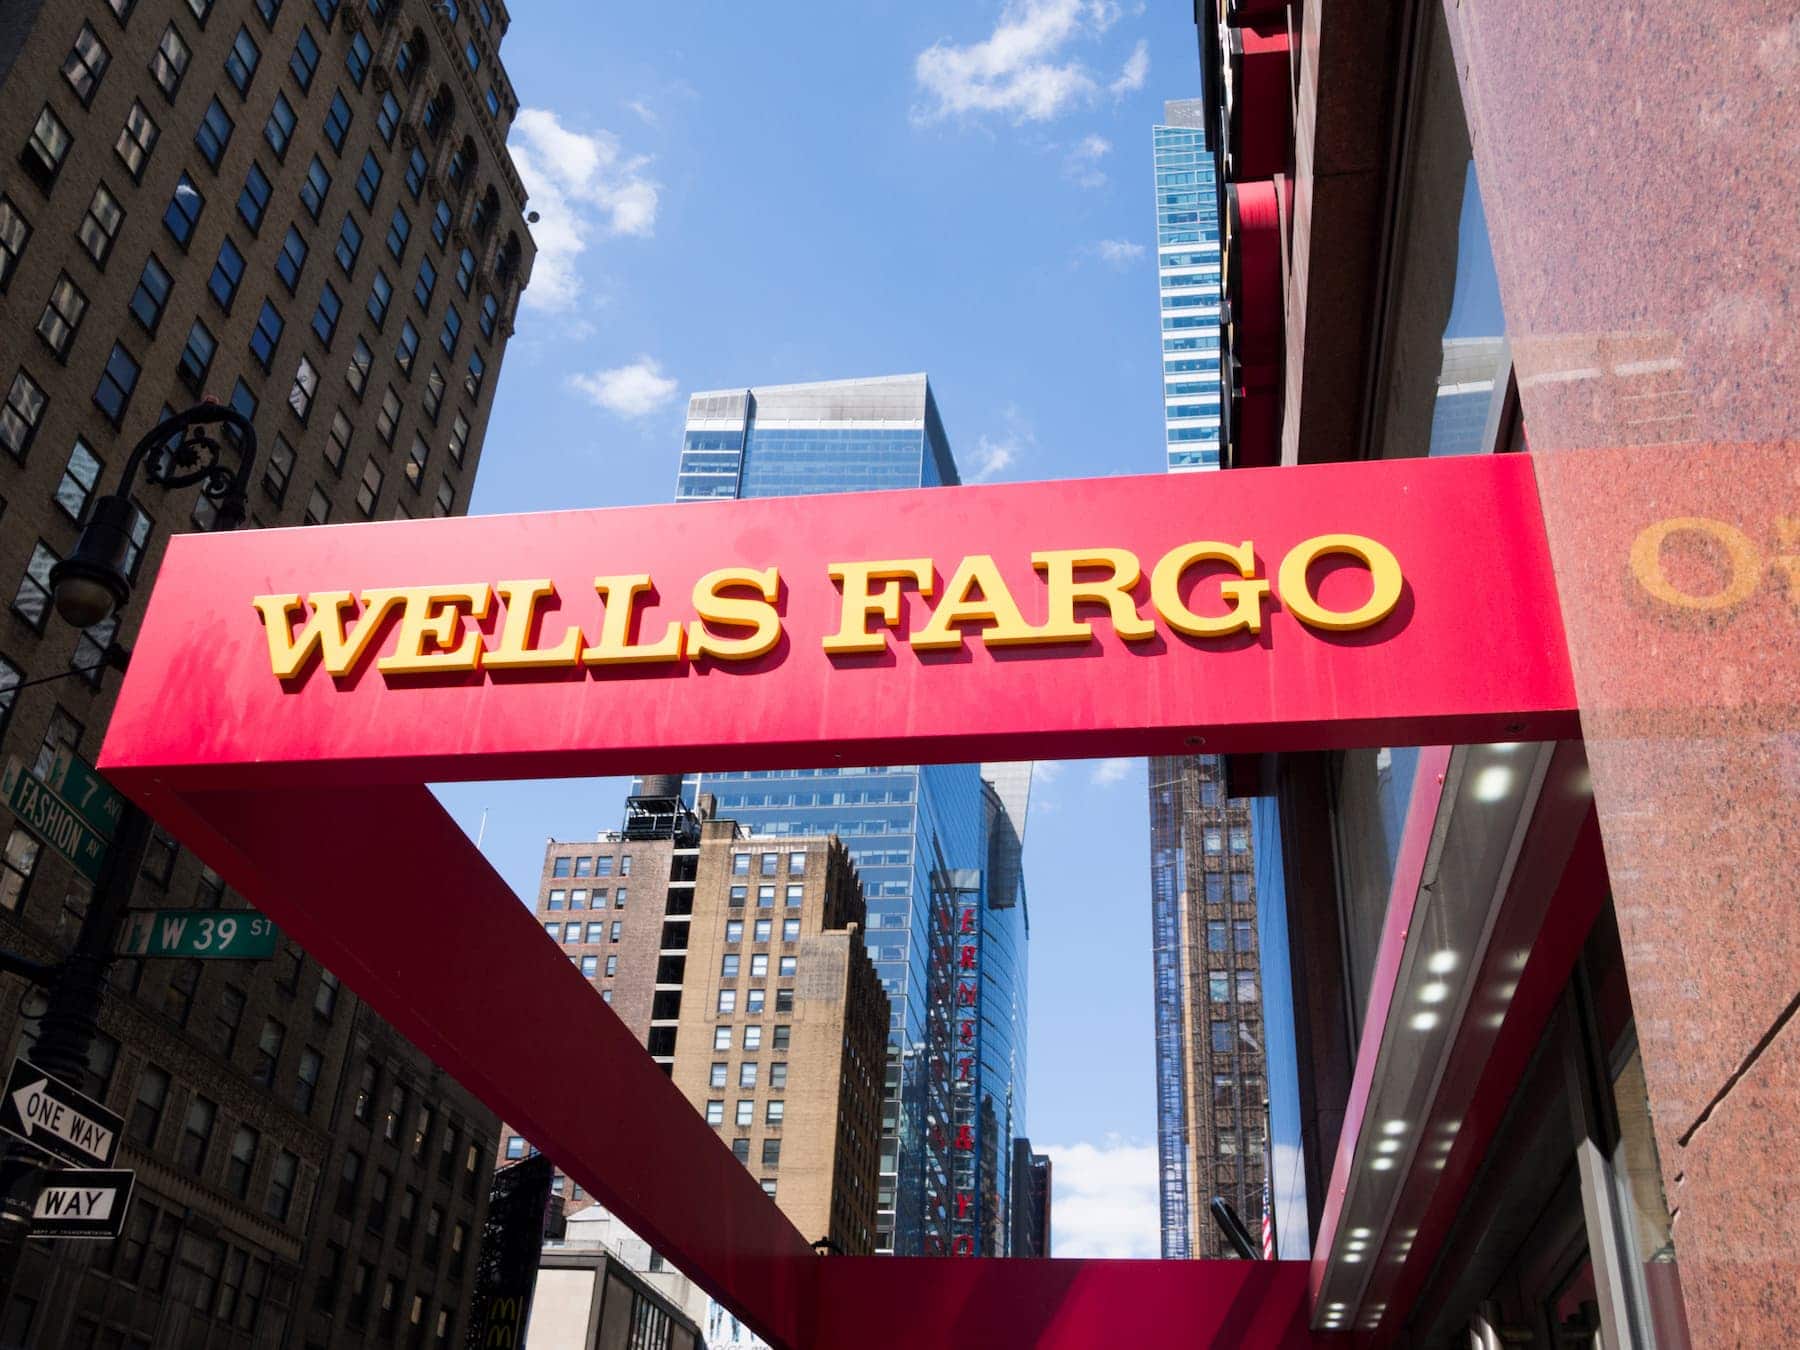 A wells fargo sign in front of a building.